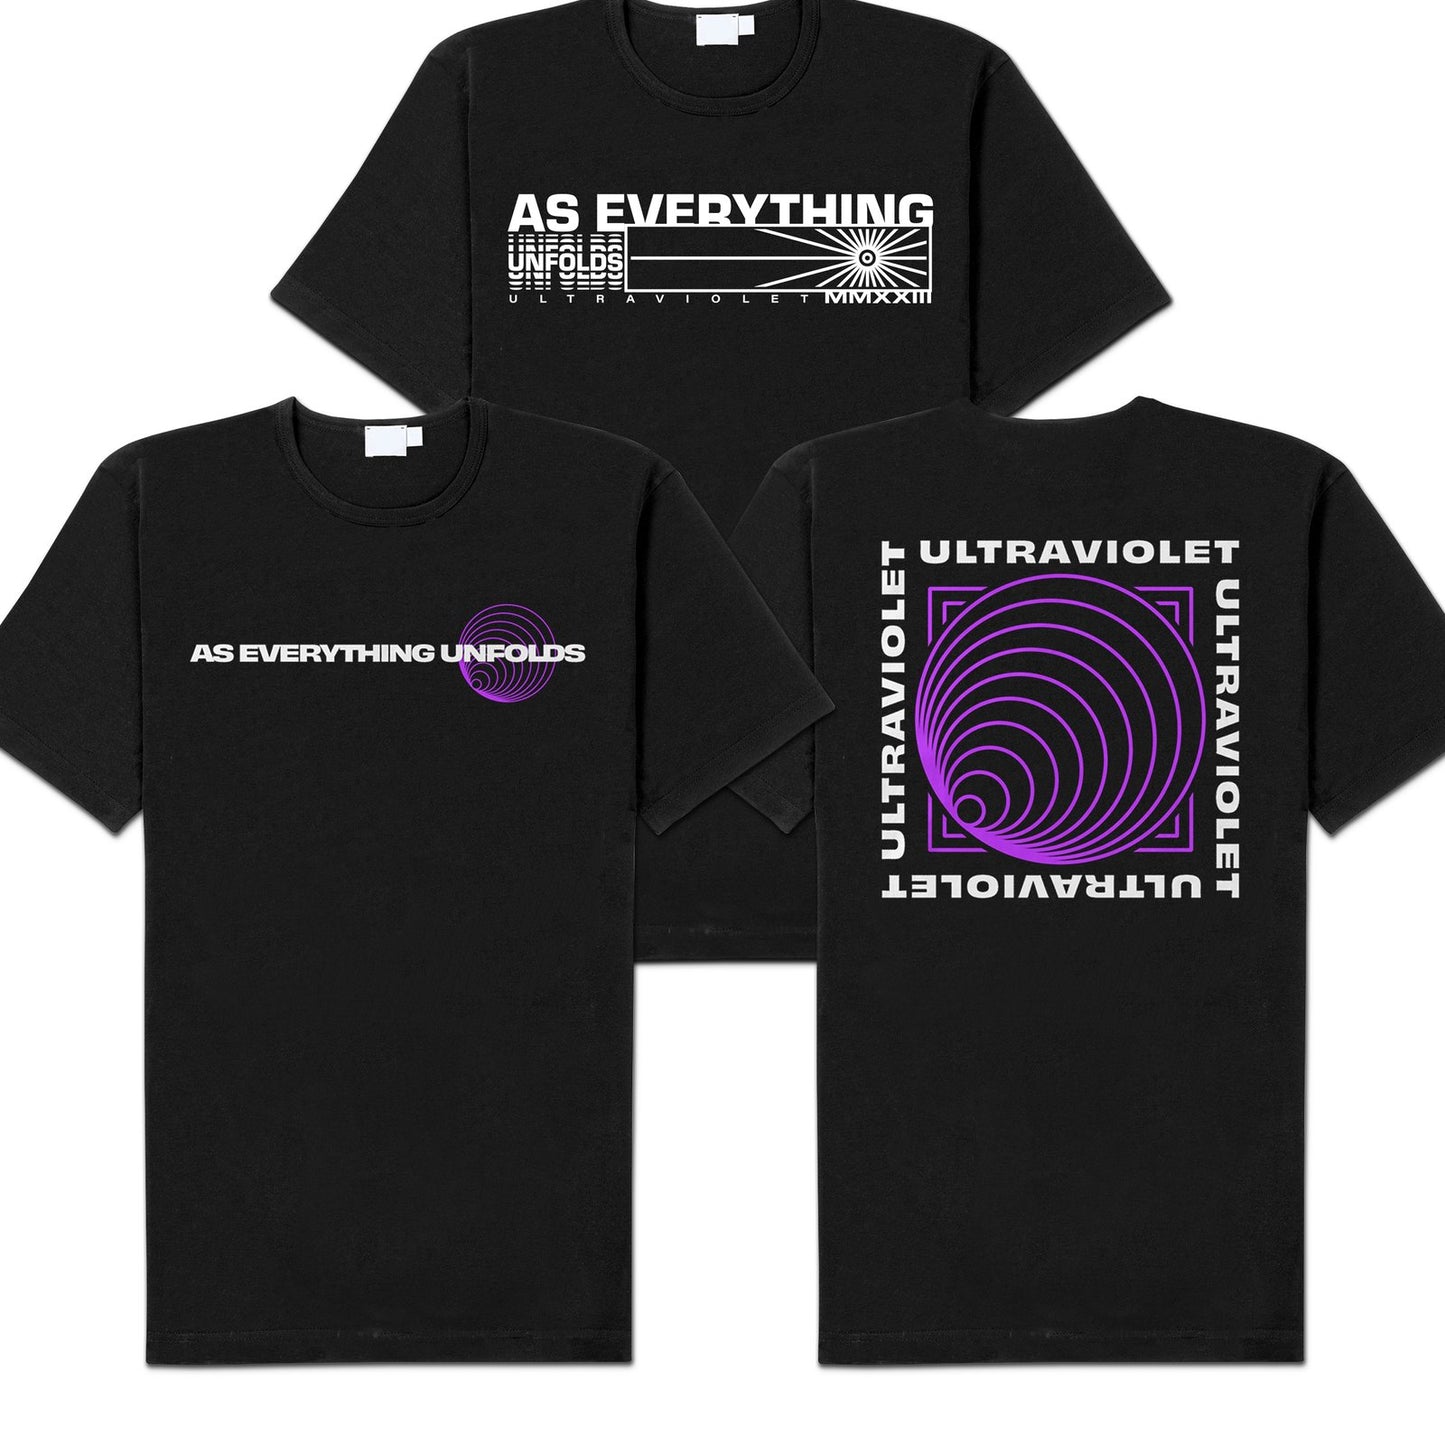 As Everything Unfolds "MMXXIII" + "Ultraviolet" Shirts